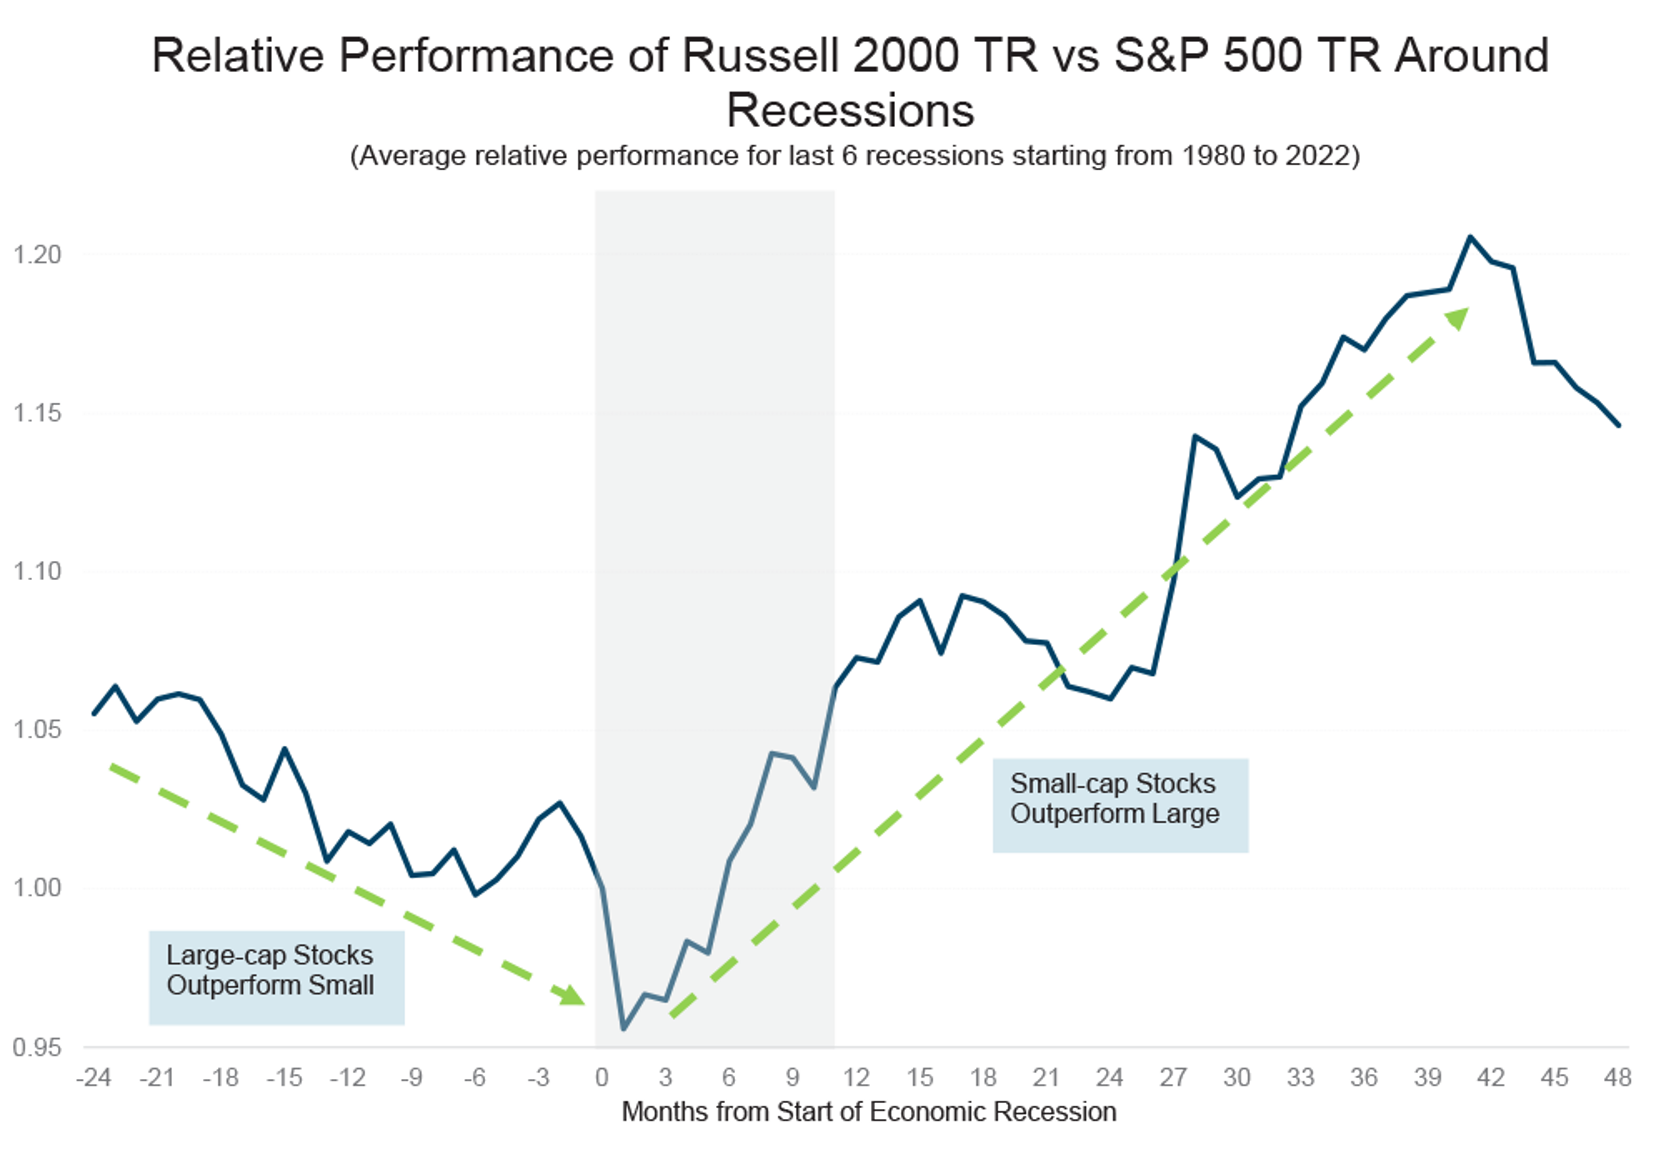 Relative Performance of Russell 2000 TR vs S&P 500 TR Around RecessionsSource: Global Alpha Capital